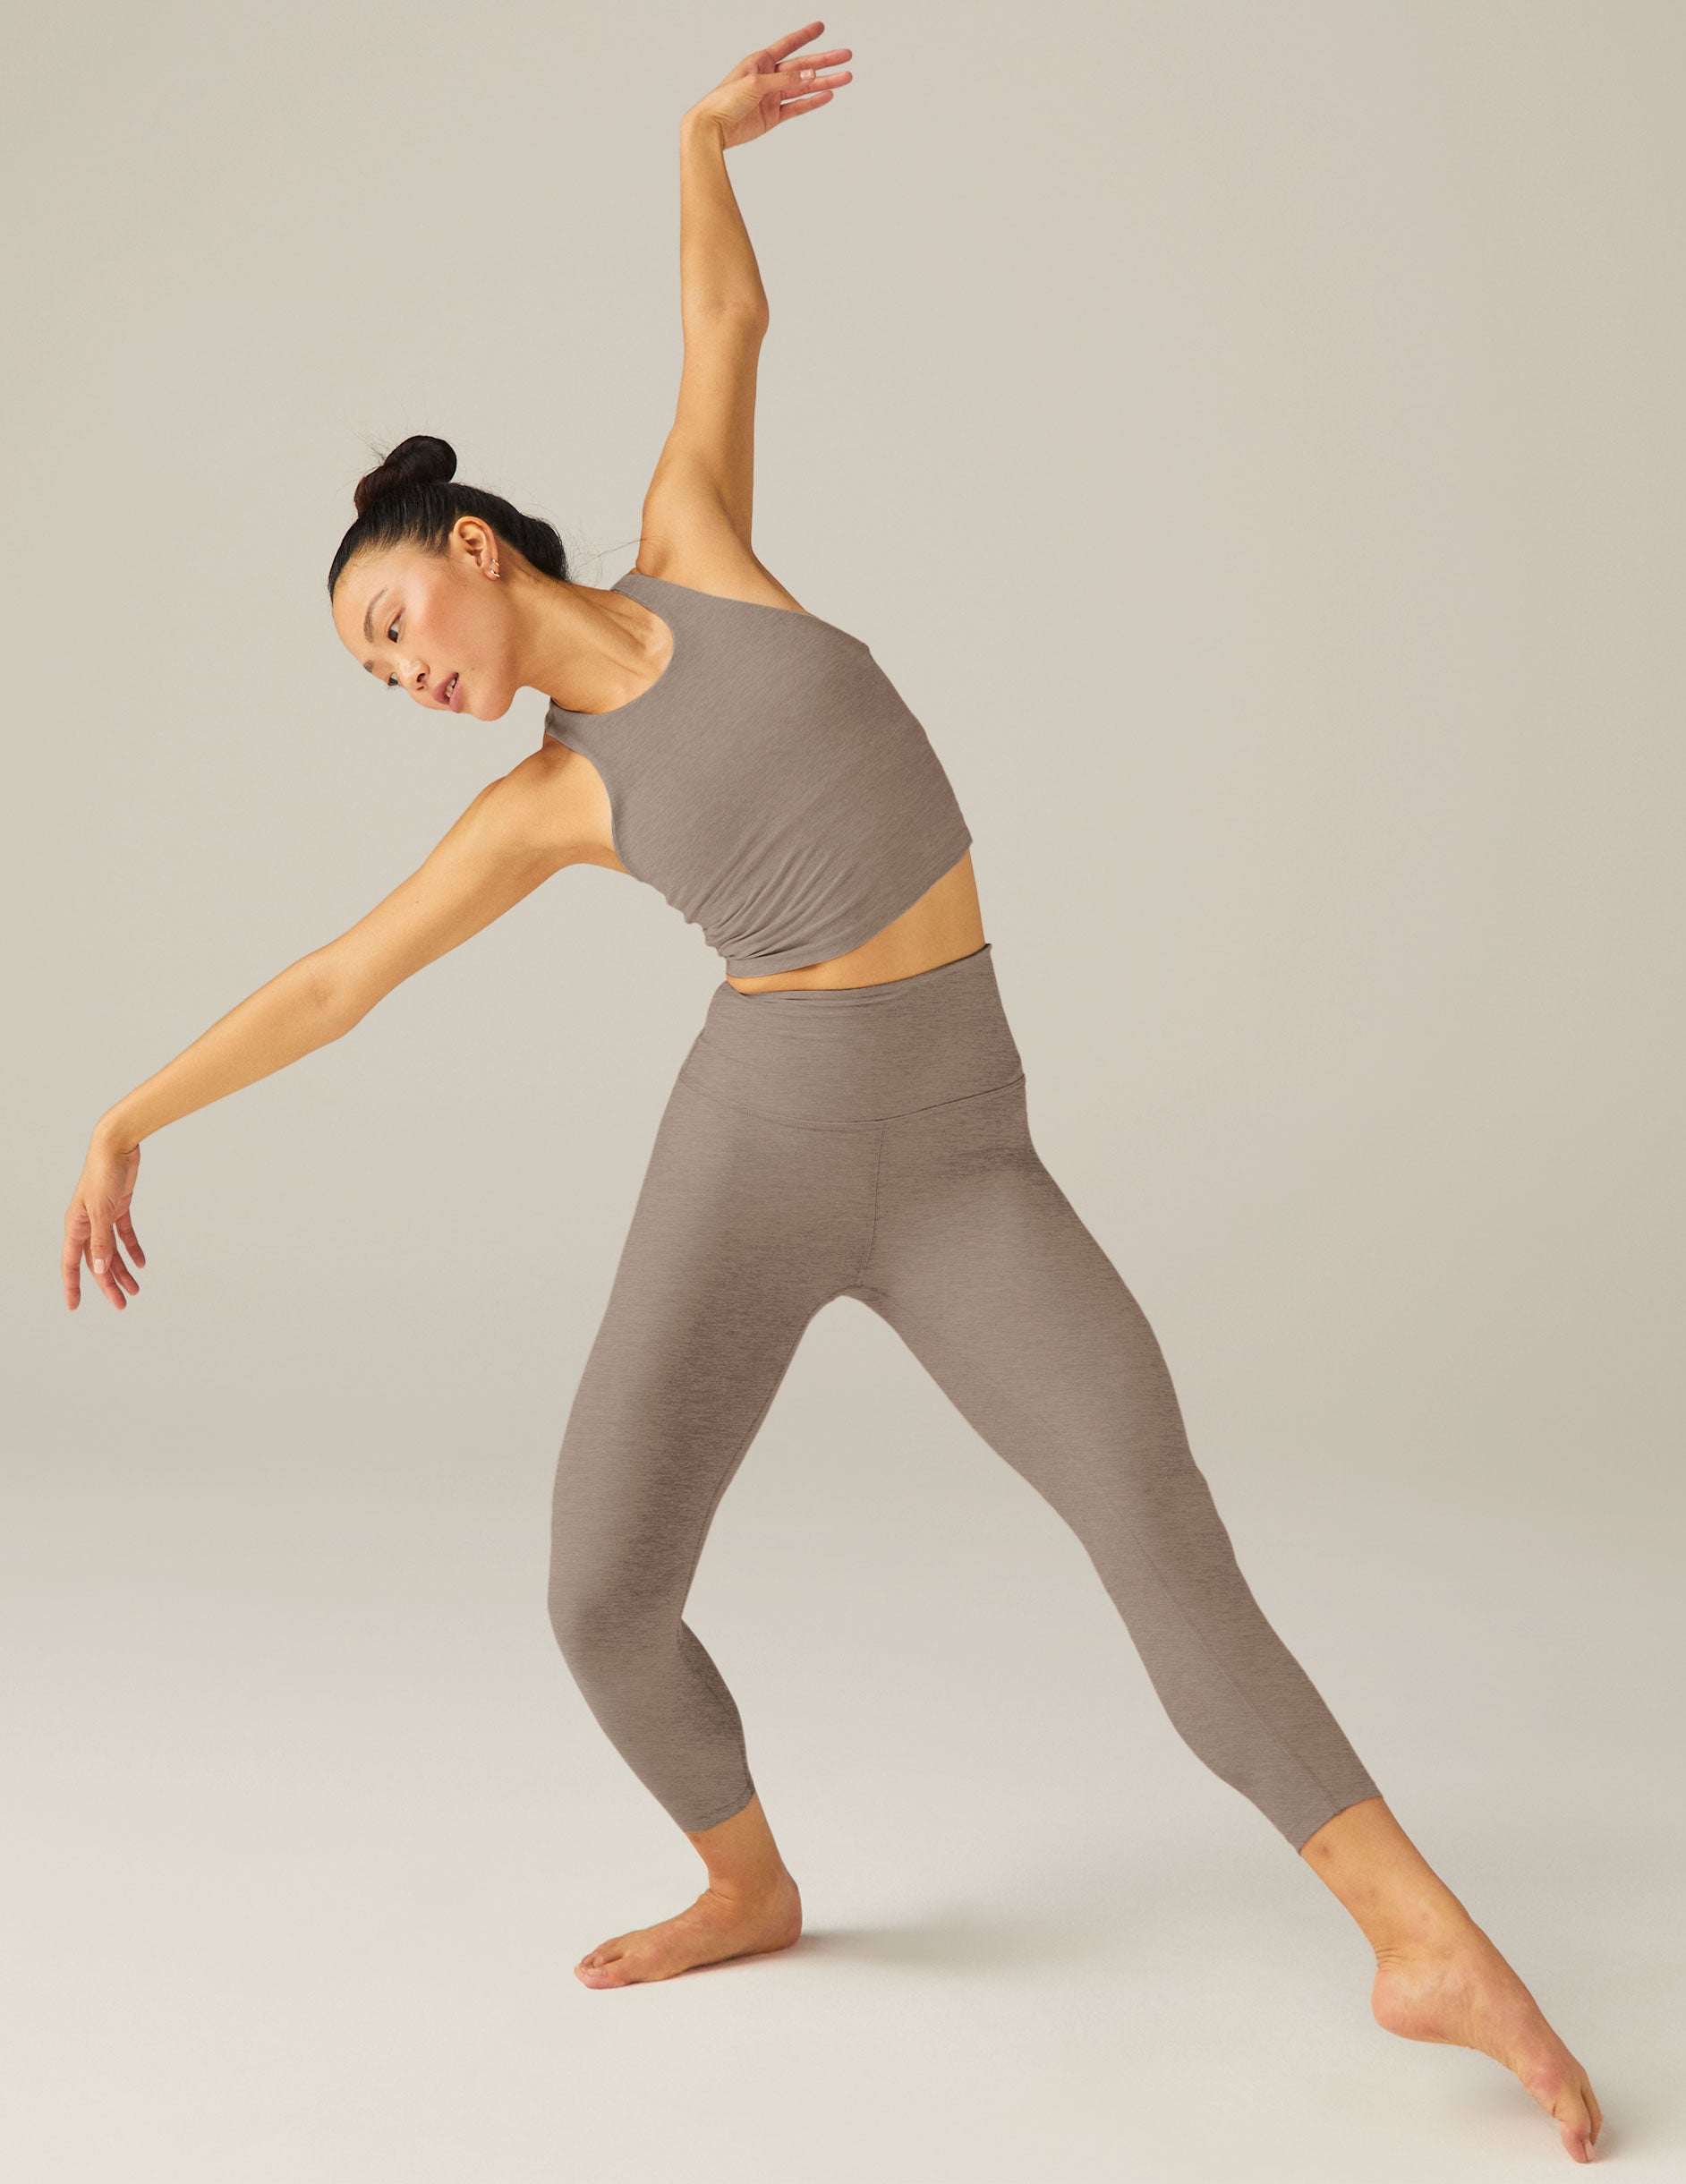 V Star - Leap into comfort or lounge in style with our versatile Capri  pants! ​ ​Whether you're relaxing or active, these are your go-to for  lounging, leisure, or leaping into action.​ ​